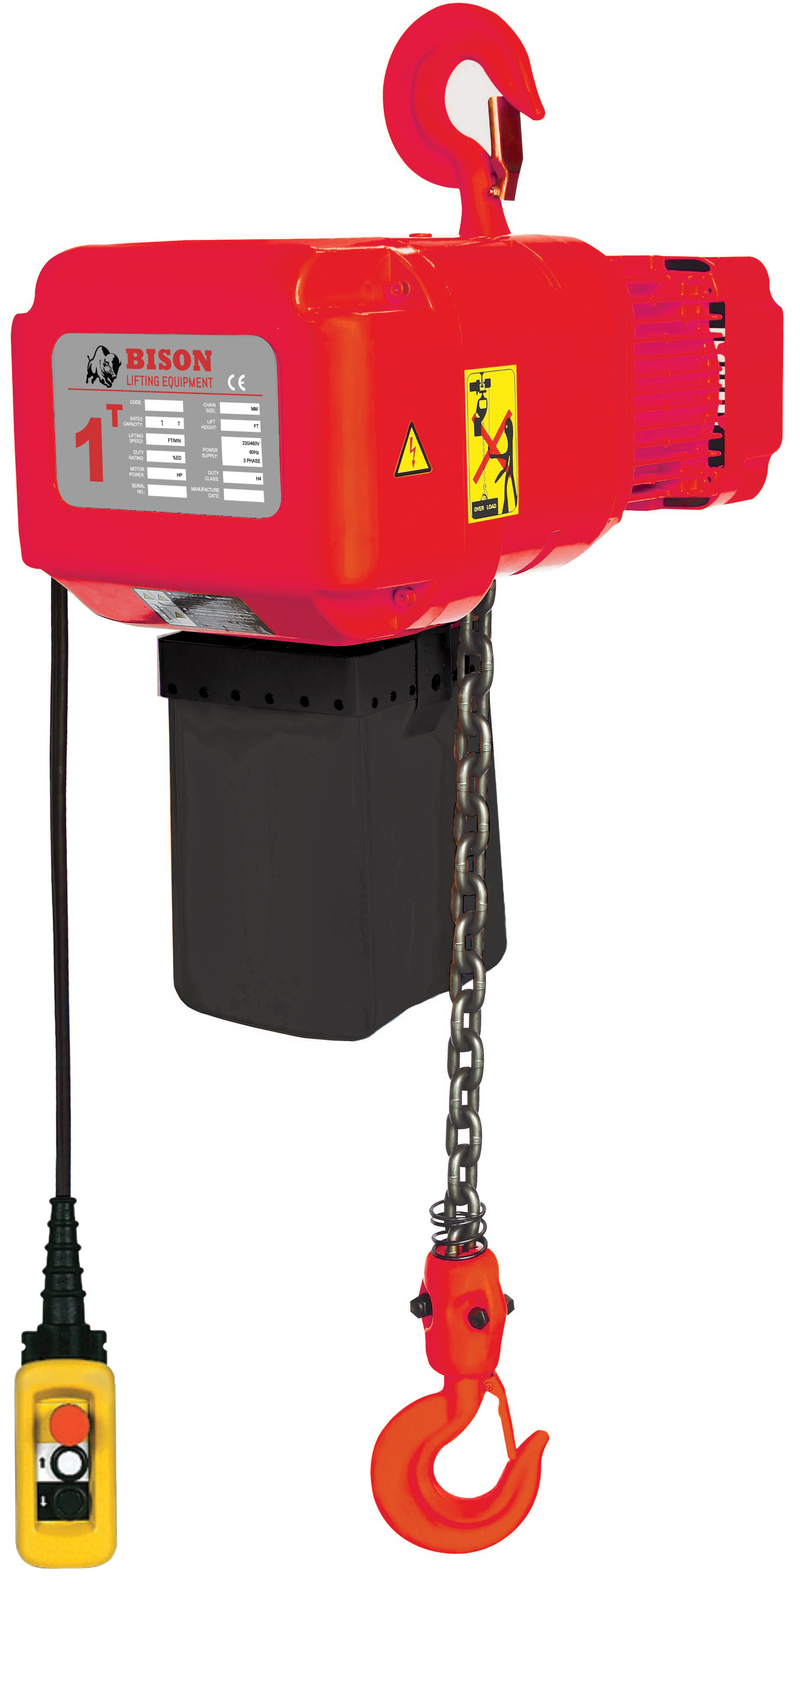 1 ton Electric Chain Hoist - Bison Lifting - Dual Speed, Three Phase, 20' Lift